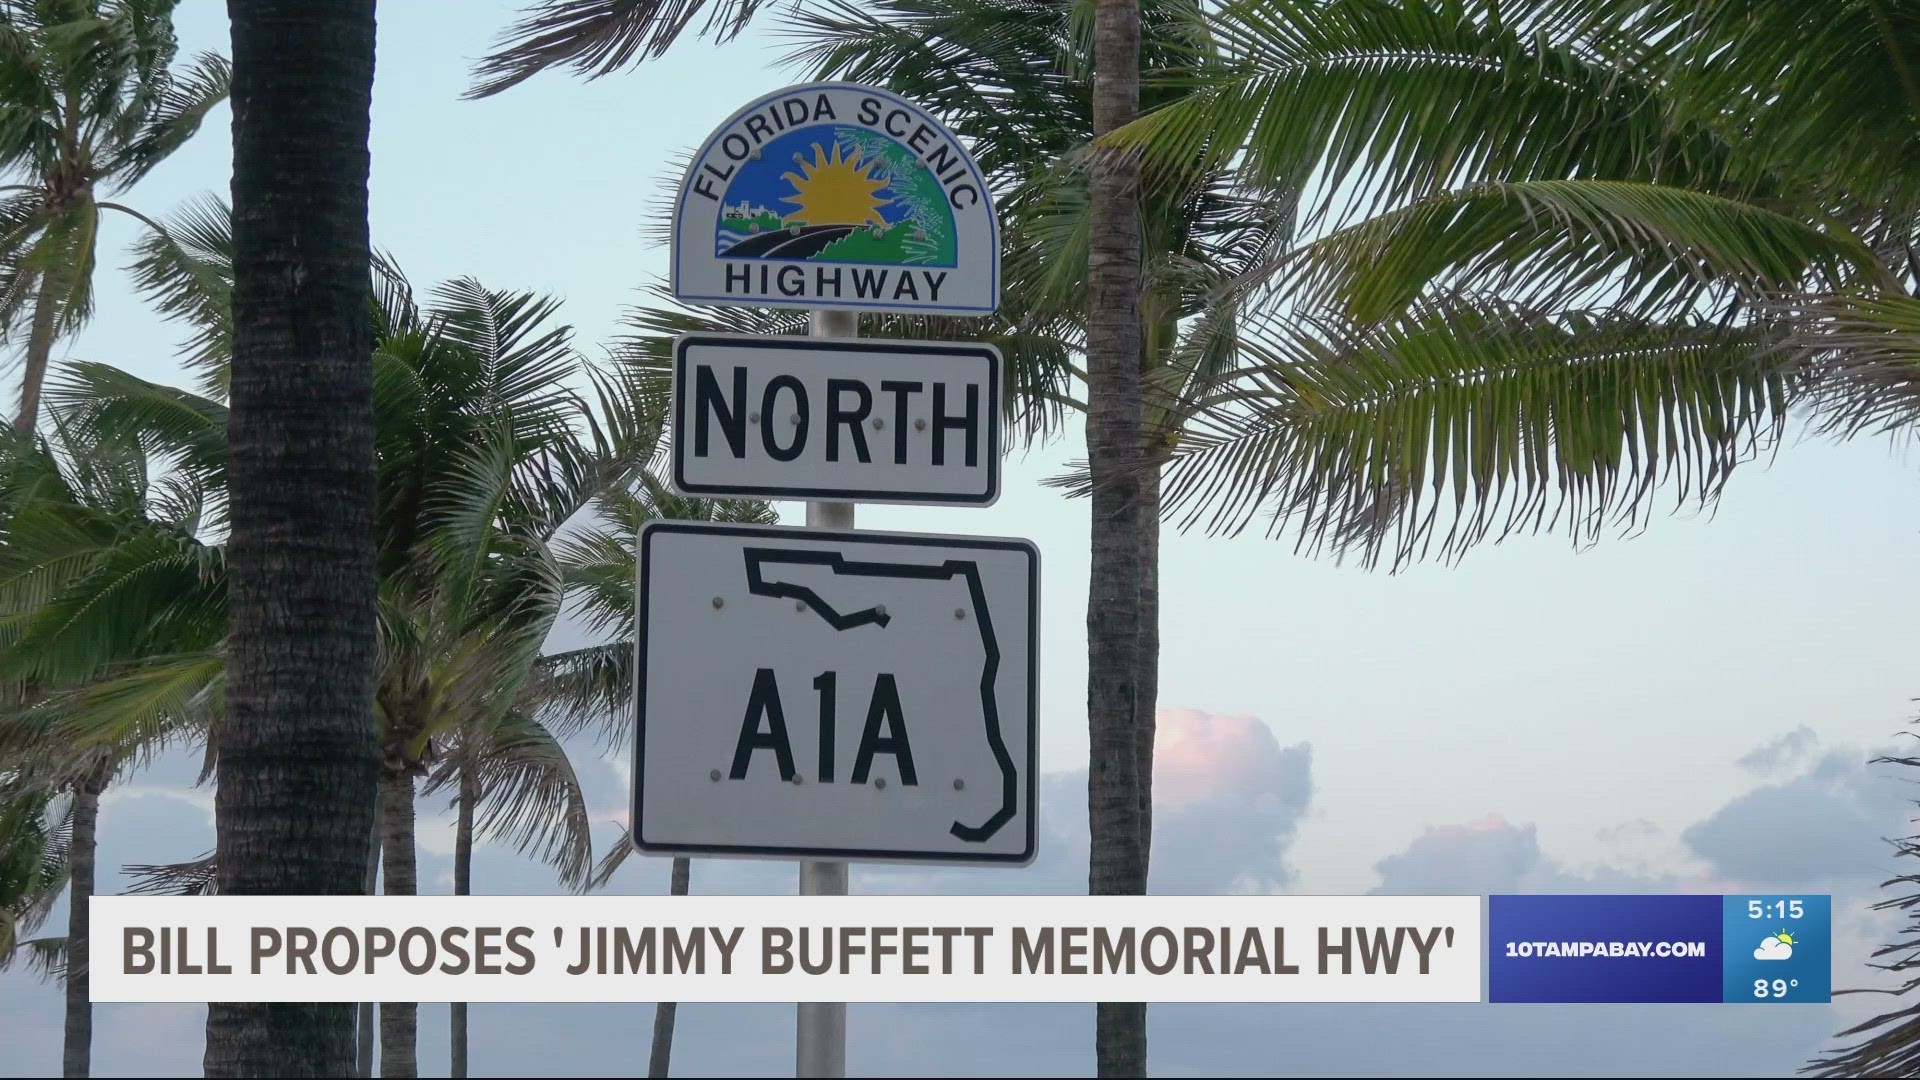 If passed, the Department of Transportation will have to place markers alerting of the new name "Jimmy Buffett Memorial Highway" by Aug. 30, 2024.